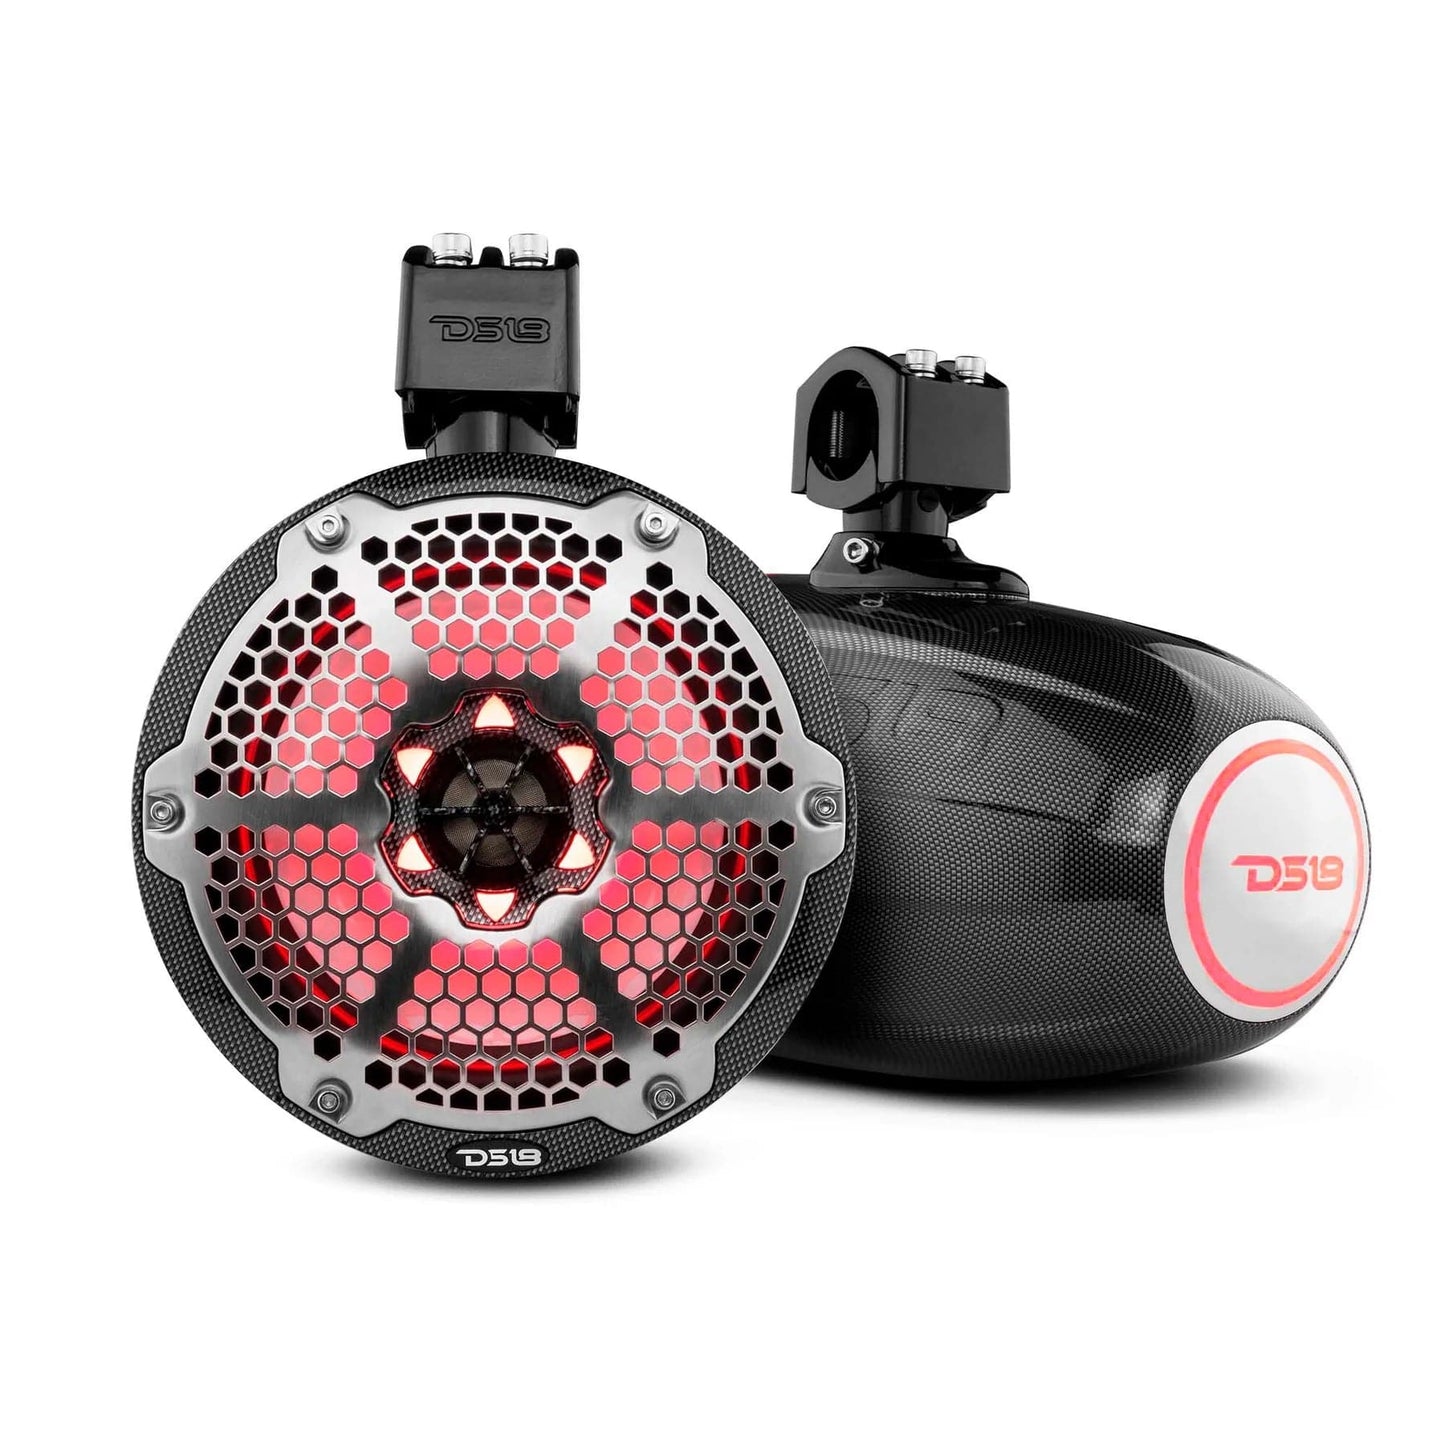 DS18 Hydro NXL-X8TP 8" Wakeboard Tower Speaker